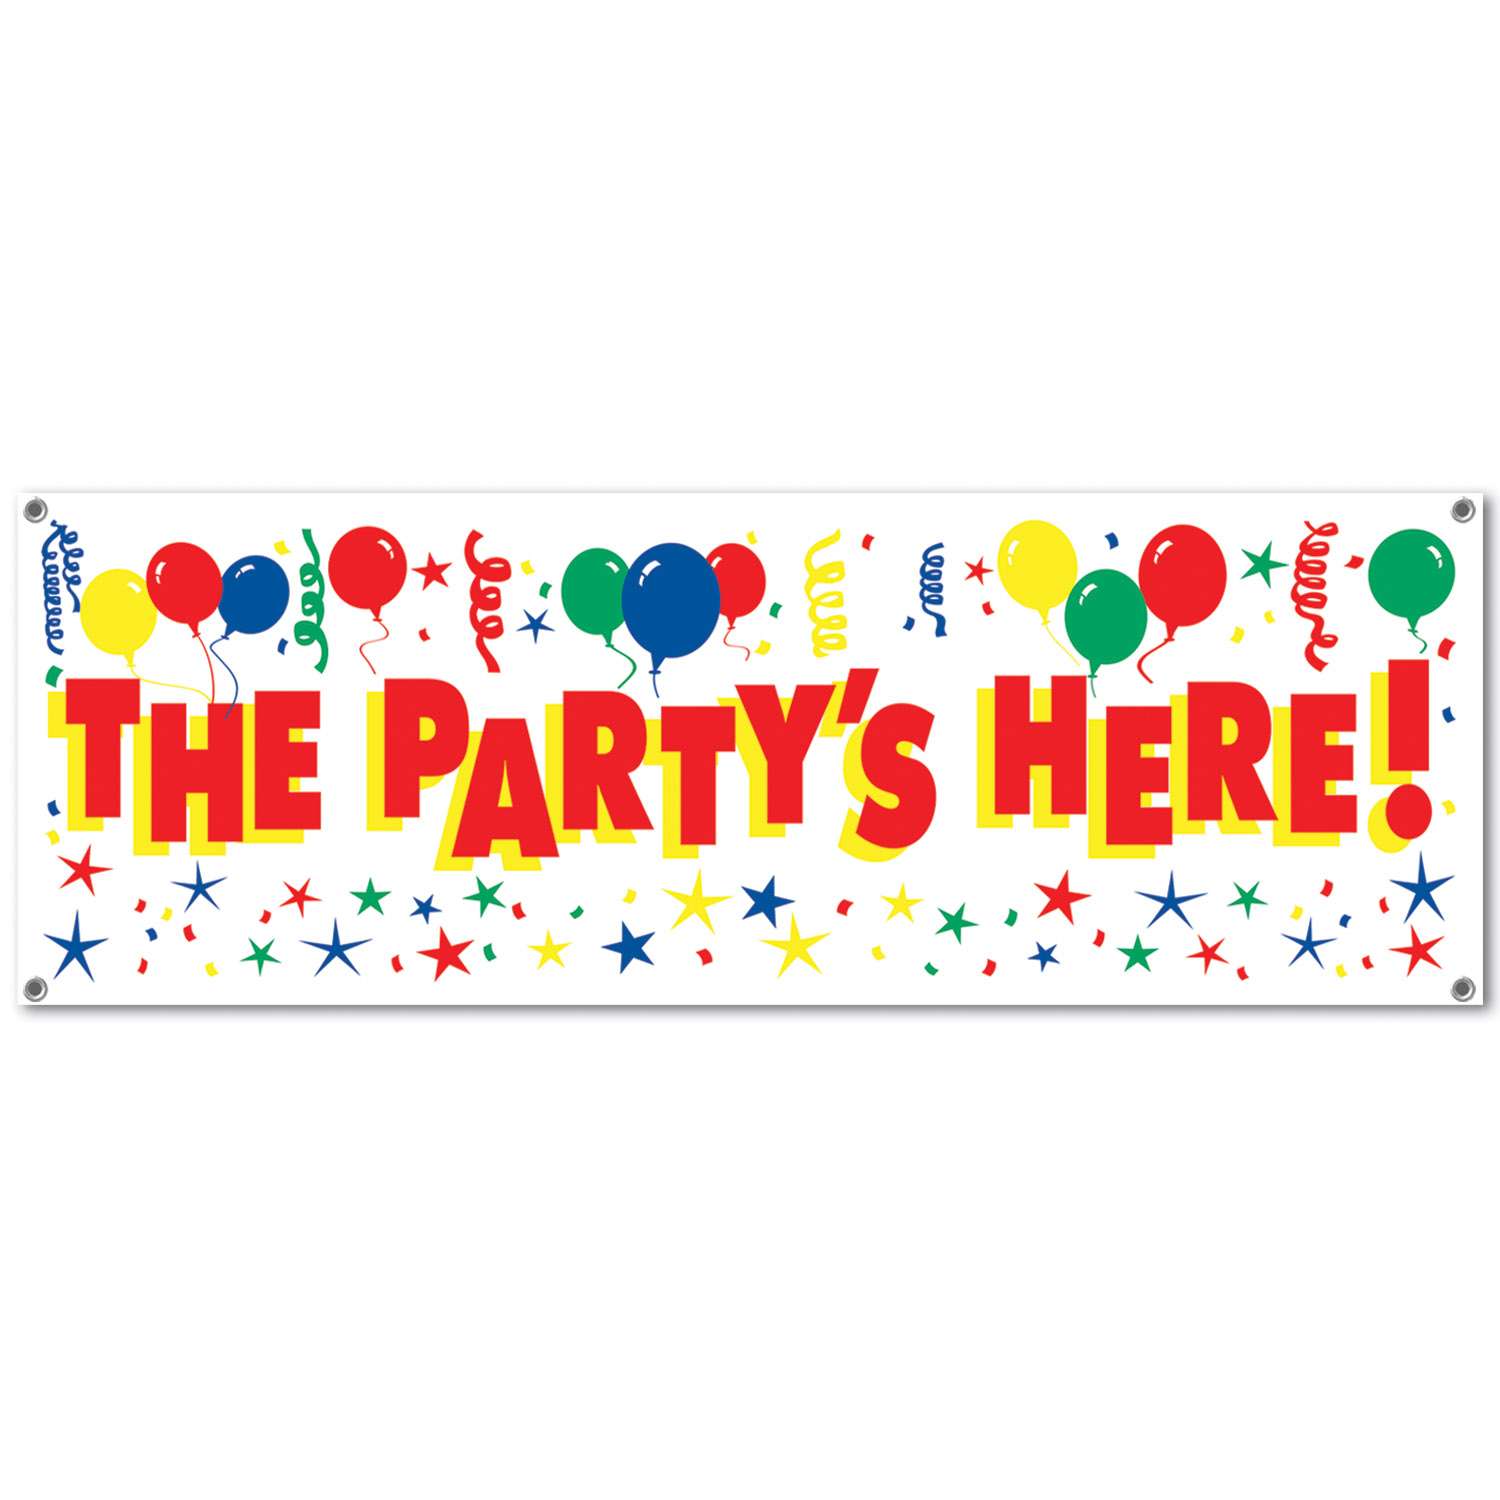 The Party's Here! SIGN Banner